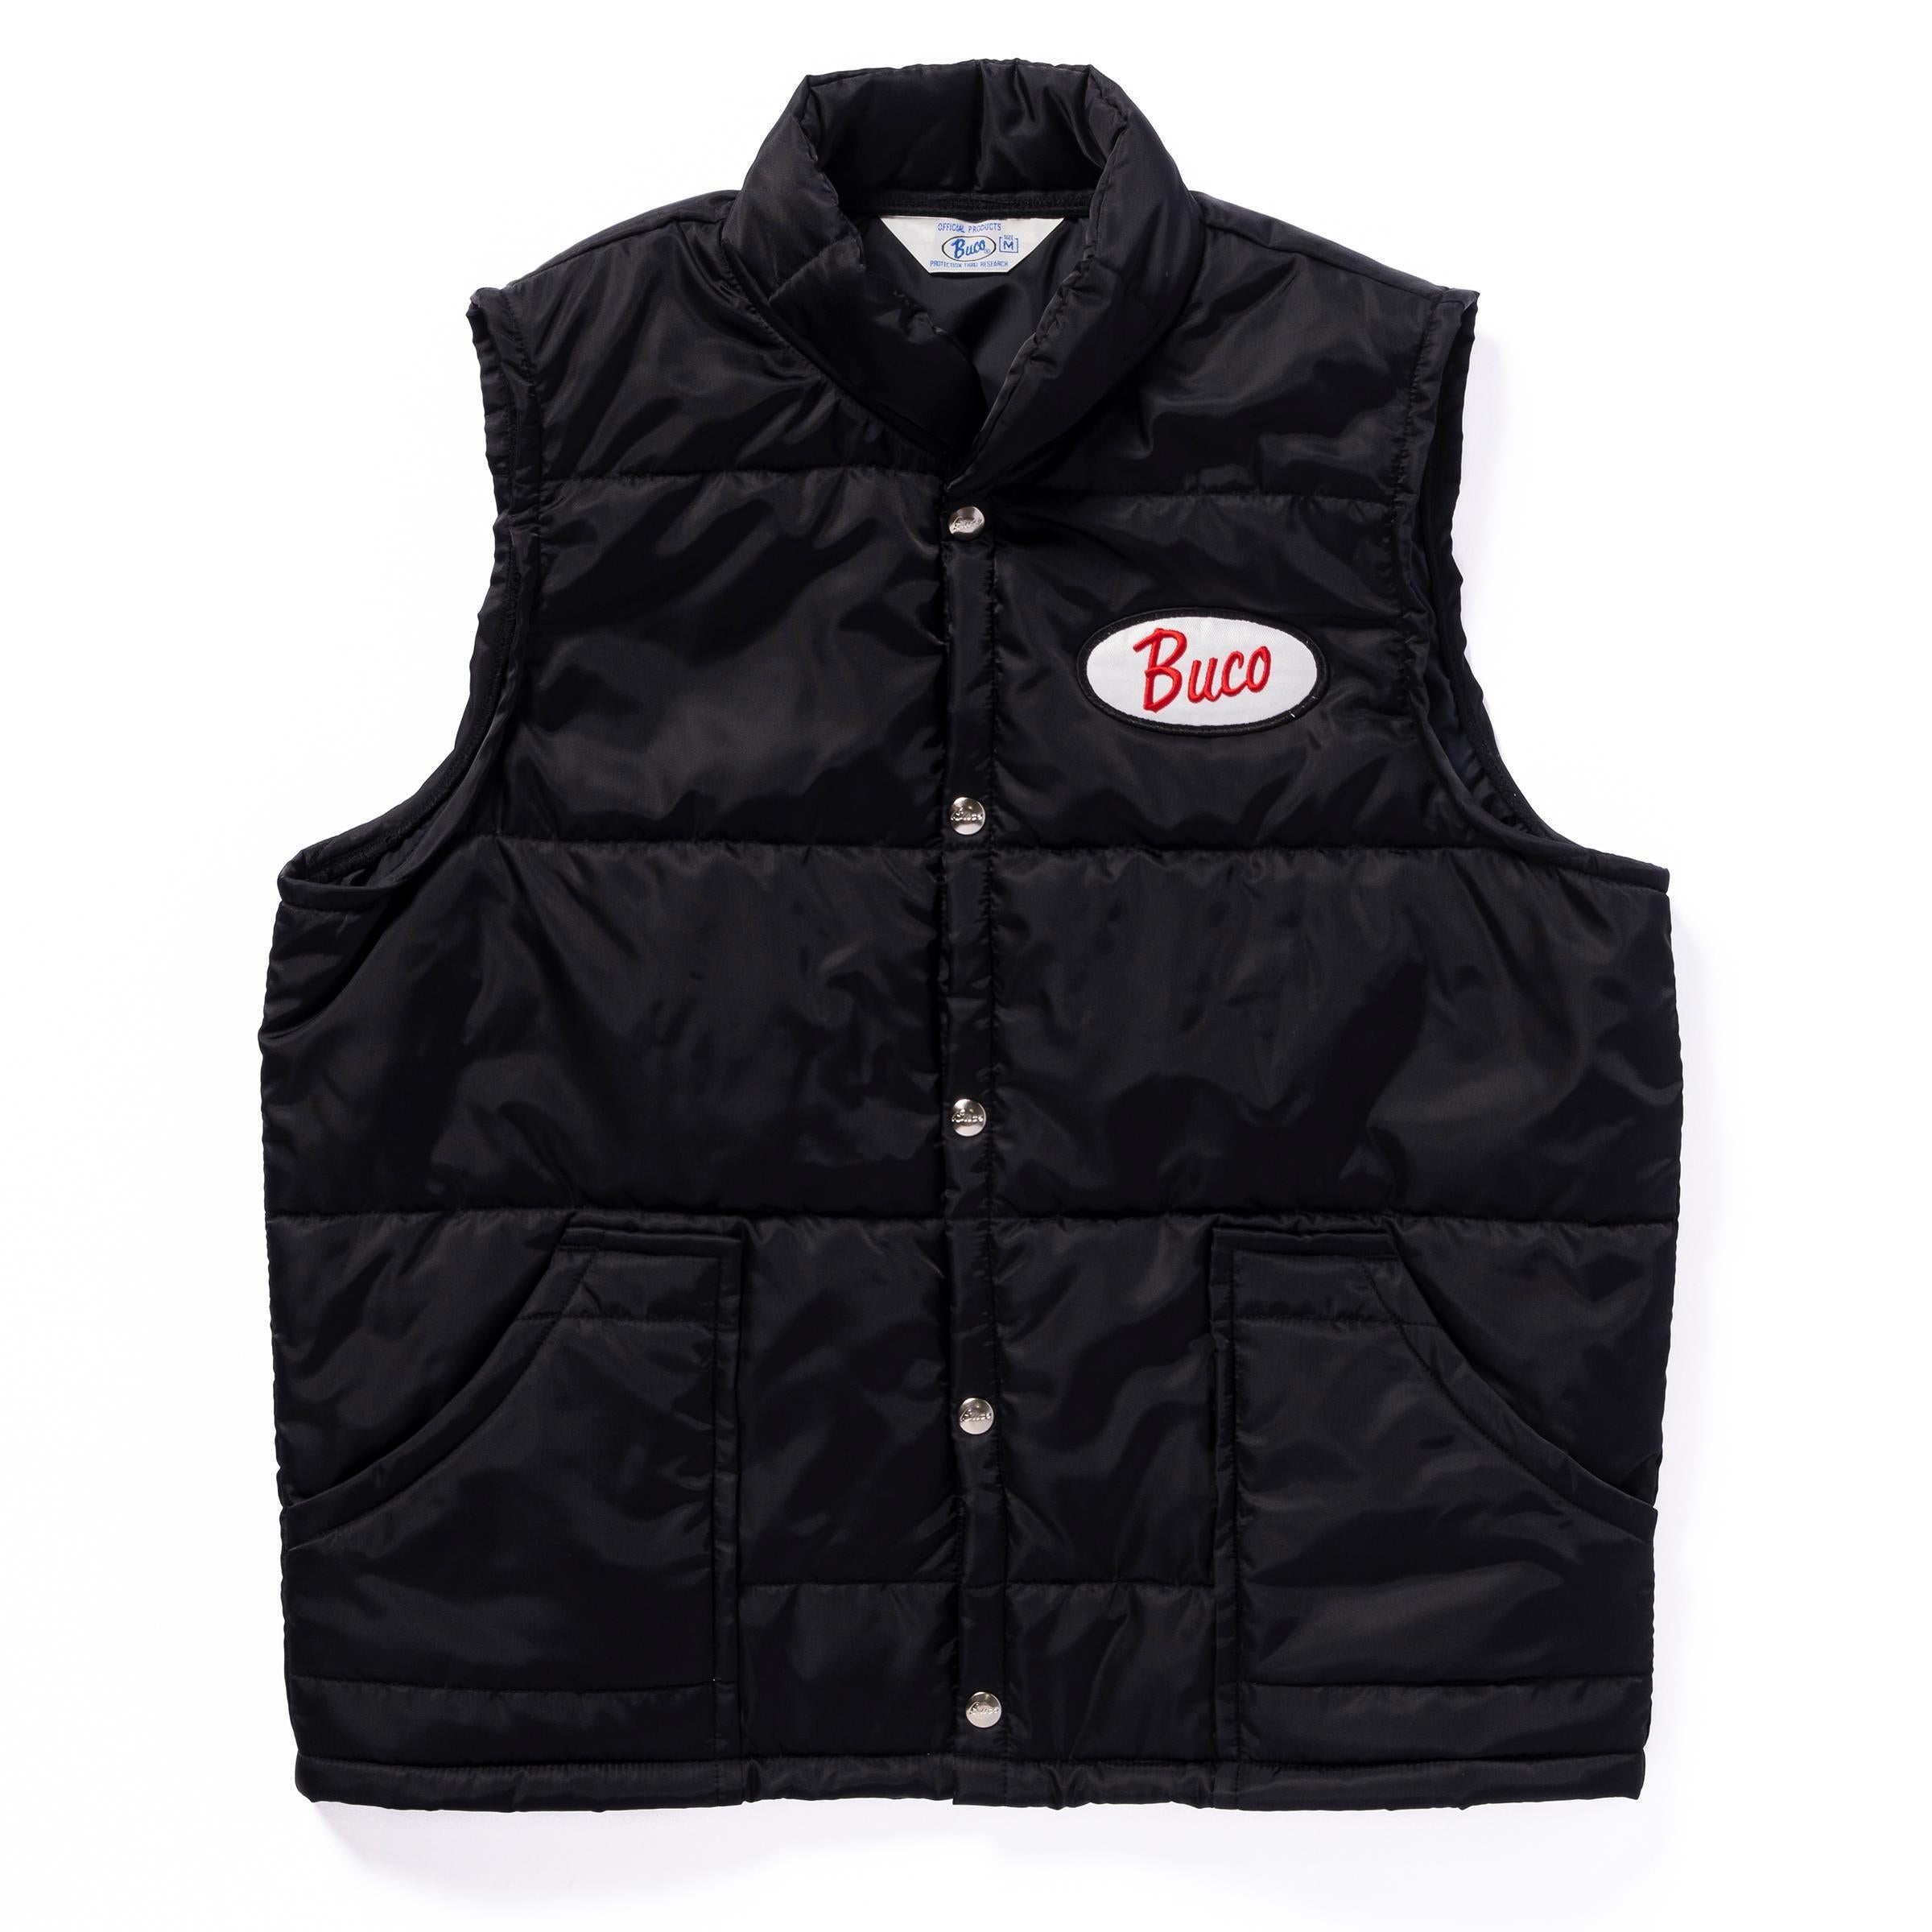 BUCO NYLON RIDER'S VEST – TIME AFTER TIME